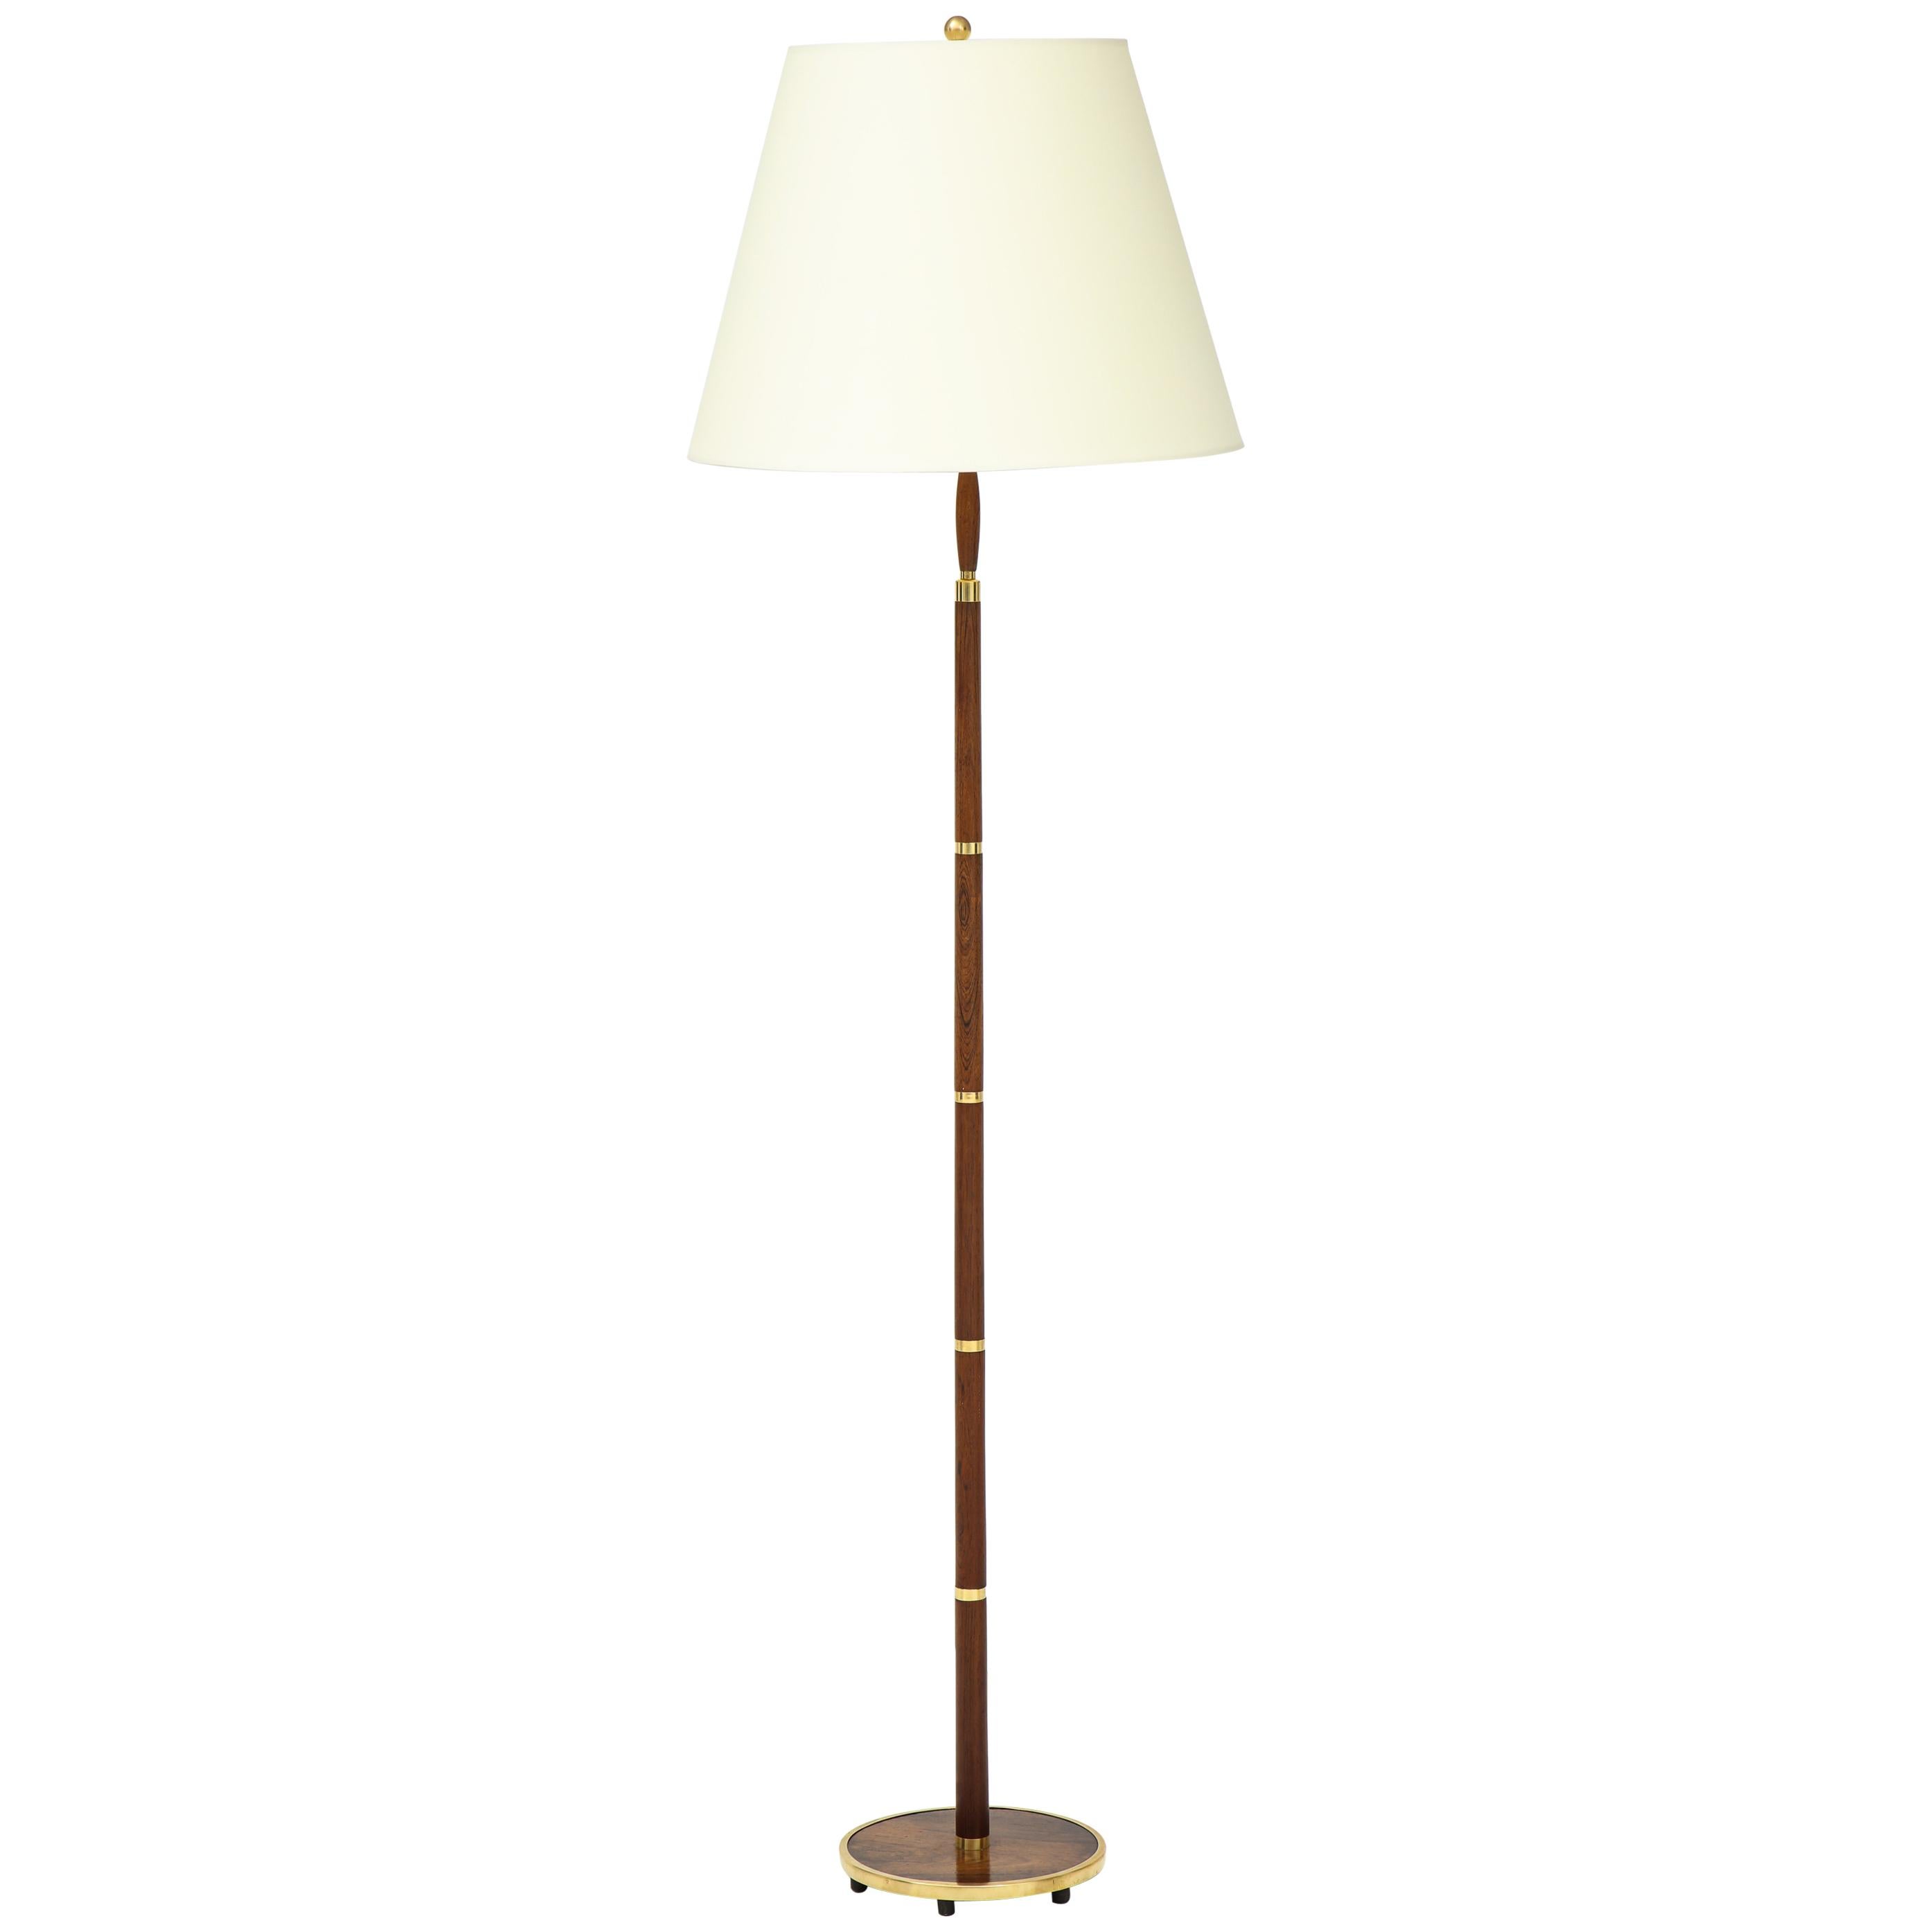 Danish Rosewood and Brass Banded Floor Lamp by Fog & Mørup, circa 1960s